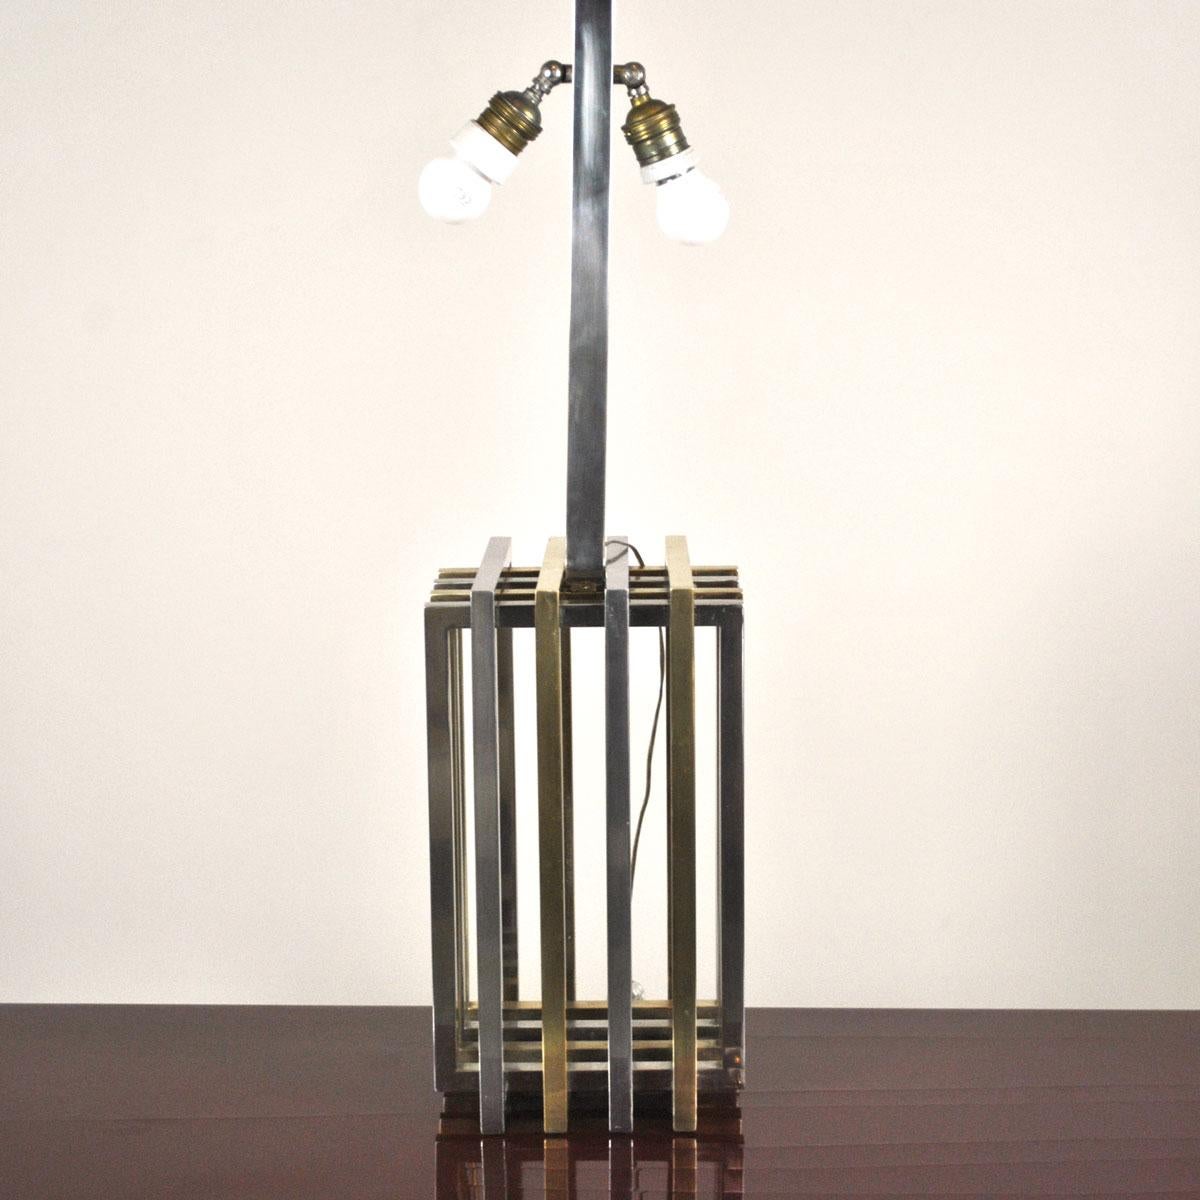 Table lamp from the 1970s by Romeo Rega.
Lamp is sold without the lampshade.